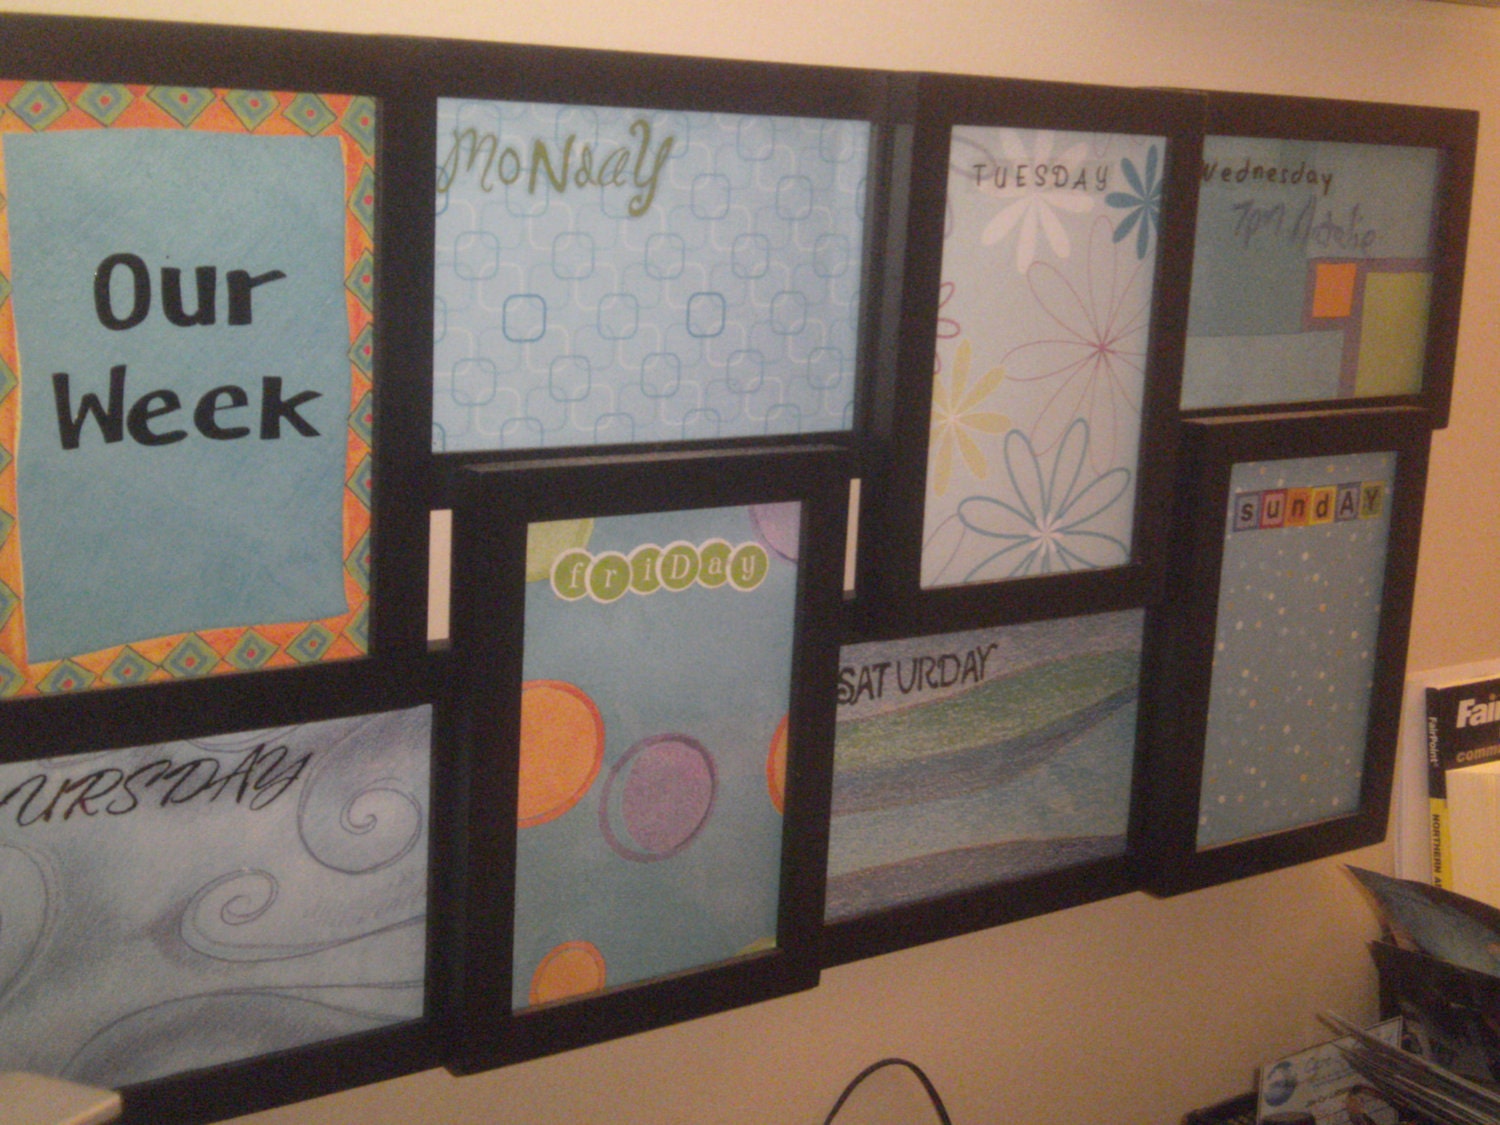 Days of the week dry-erase board